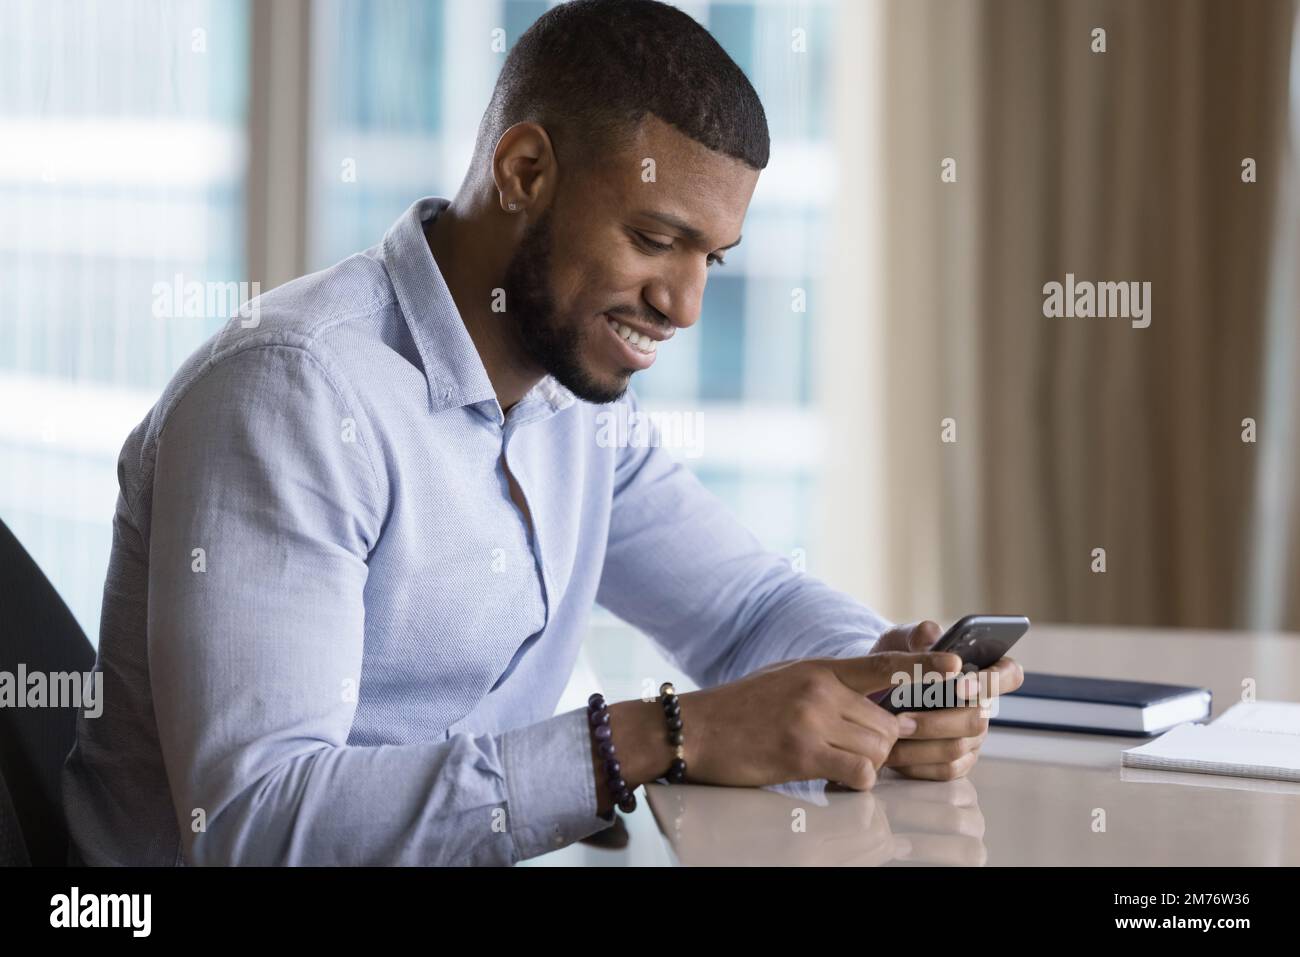 African business man holds cell phone at workplace Stock Photo